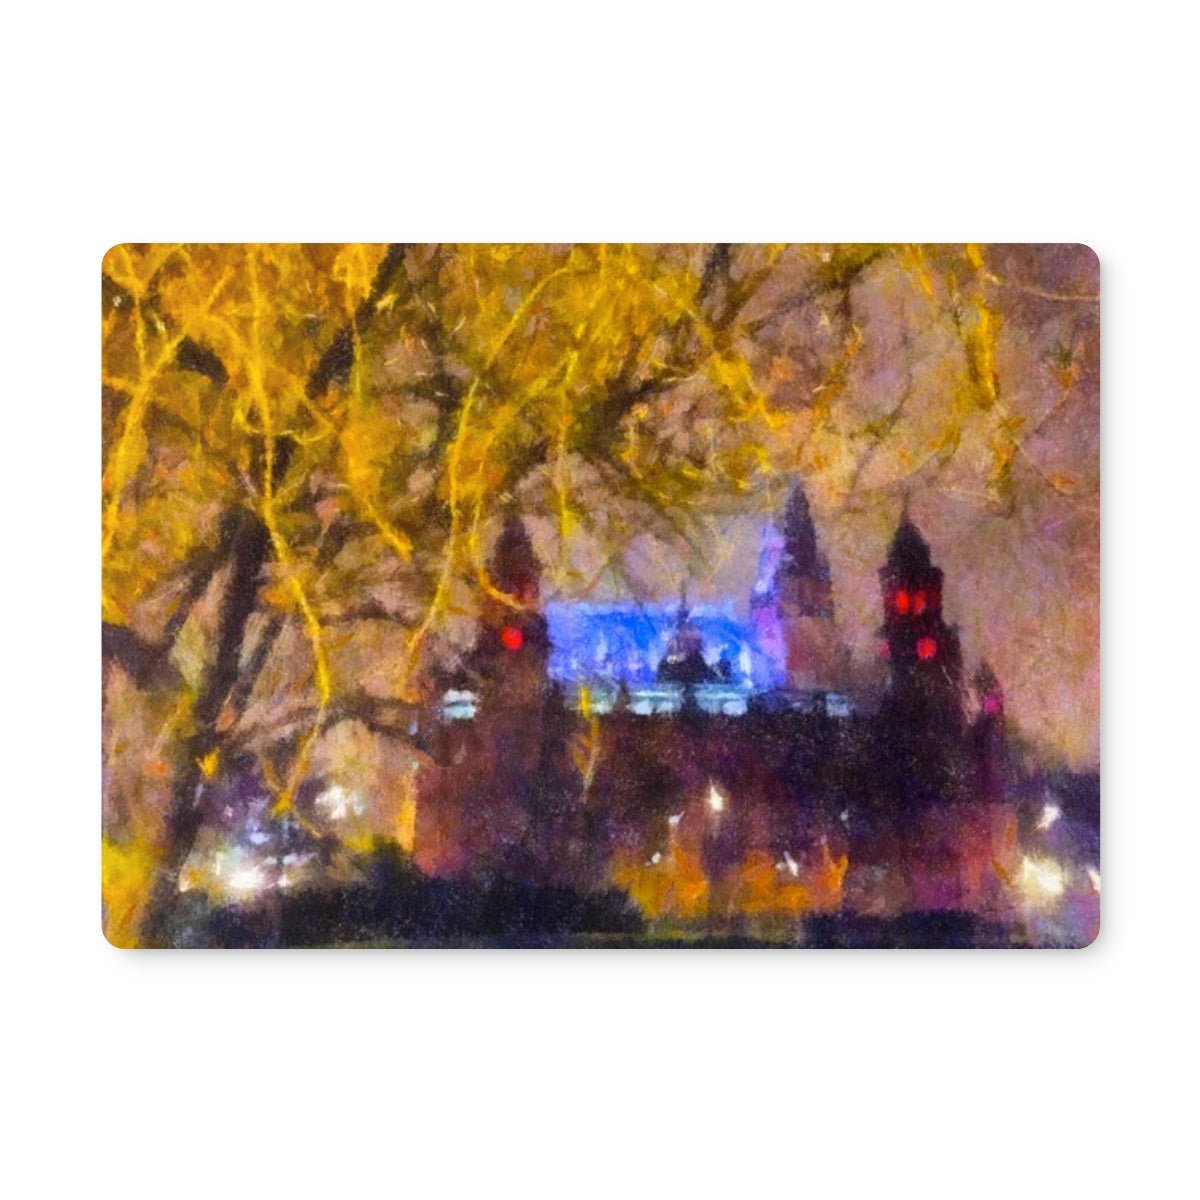 Kelvingrove Nights Glasgow Art Gifts Placemat-Placemats-Edinburgh & Glasgow Art Gallery-4 Placemats-Paintings, Prints, Homeware, Art Gifts From Scotland By Scottish Artist Kevin Hunter